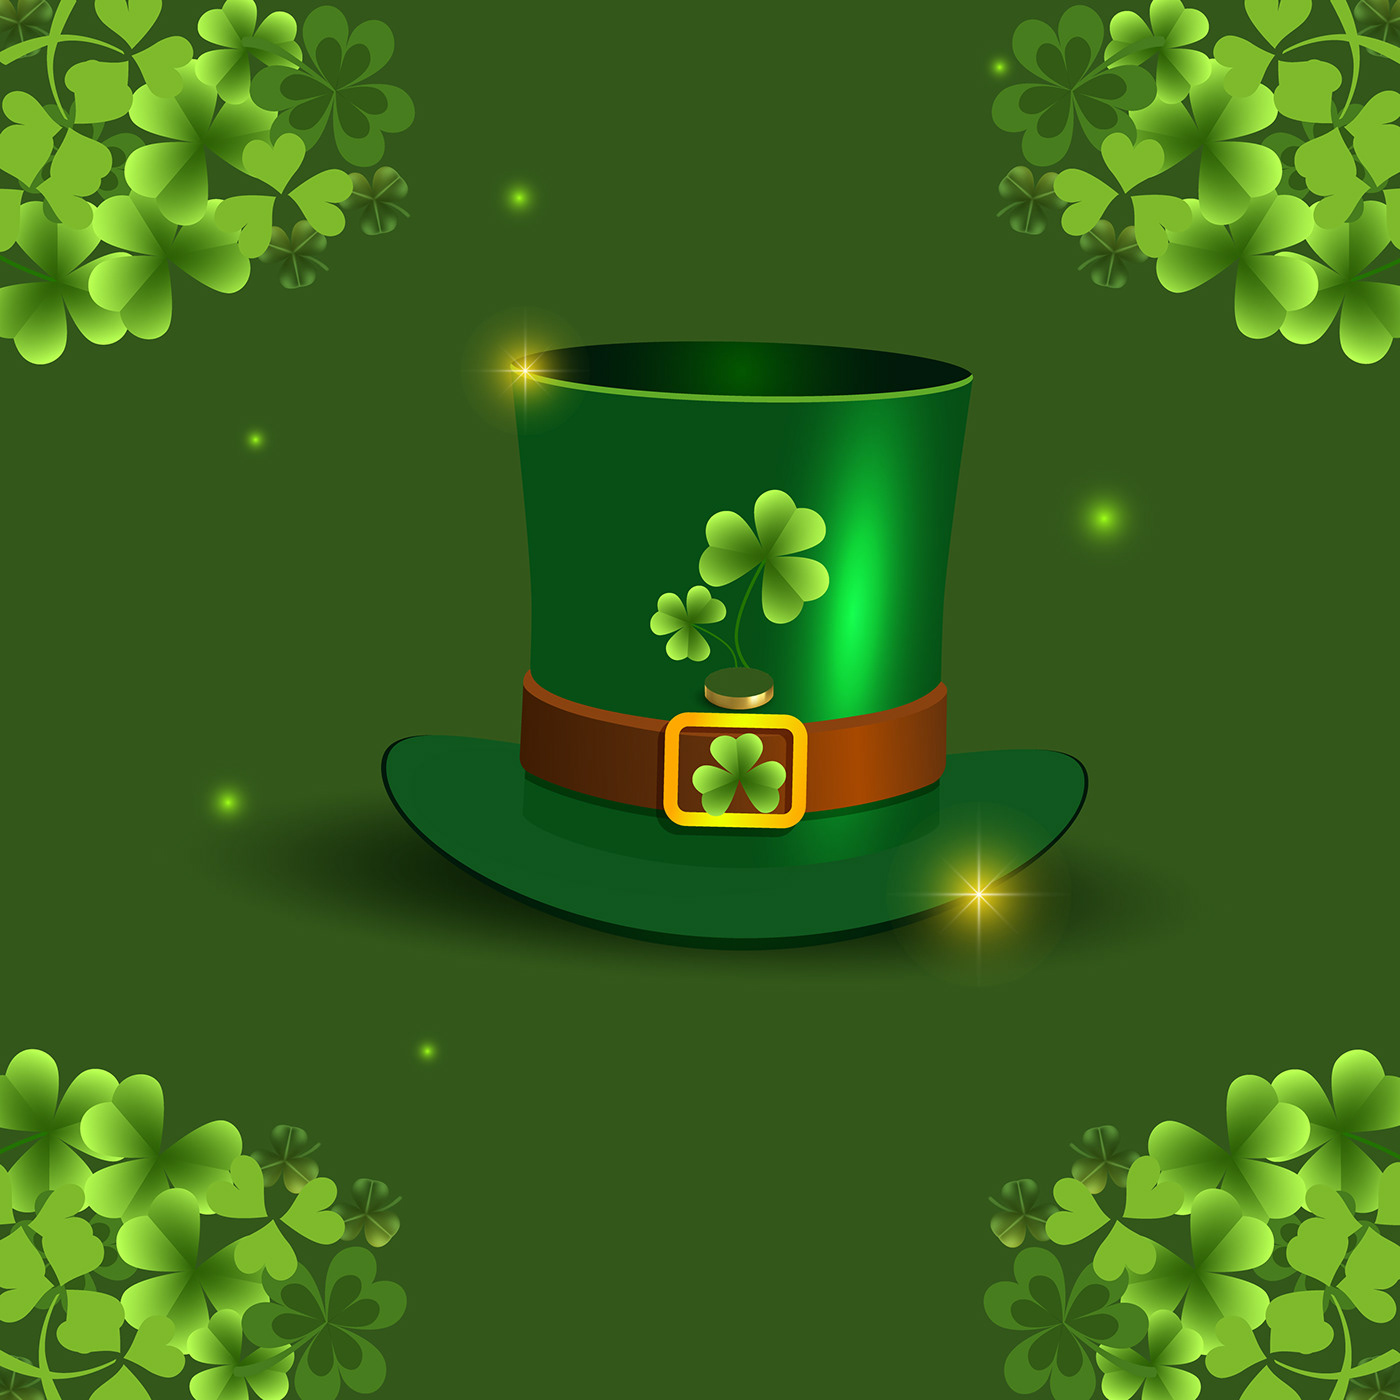 st-patrick-s-day design st-patrick-s-day st-patrick-s st-patrick st-patrick's day Halloween spooky witch fantasy concept art